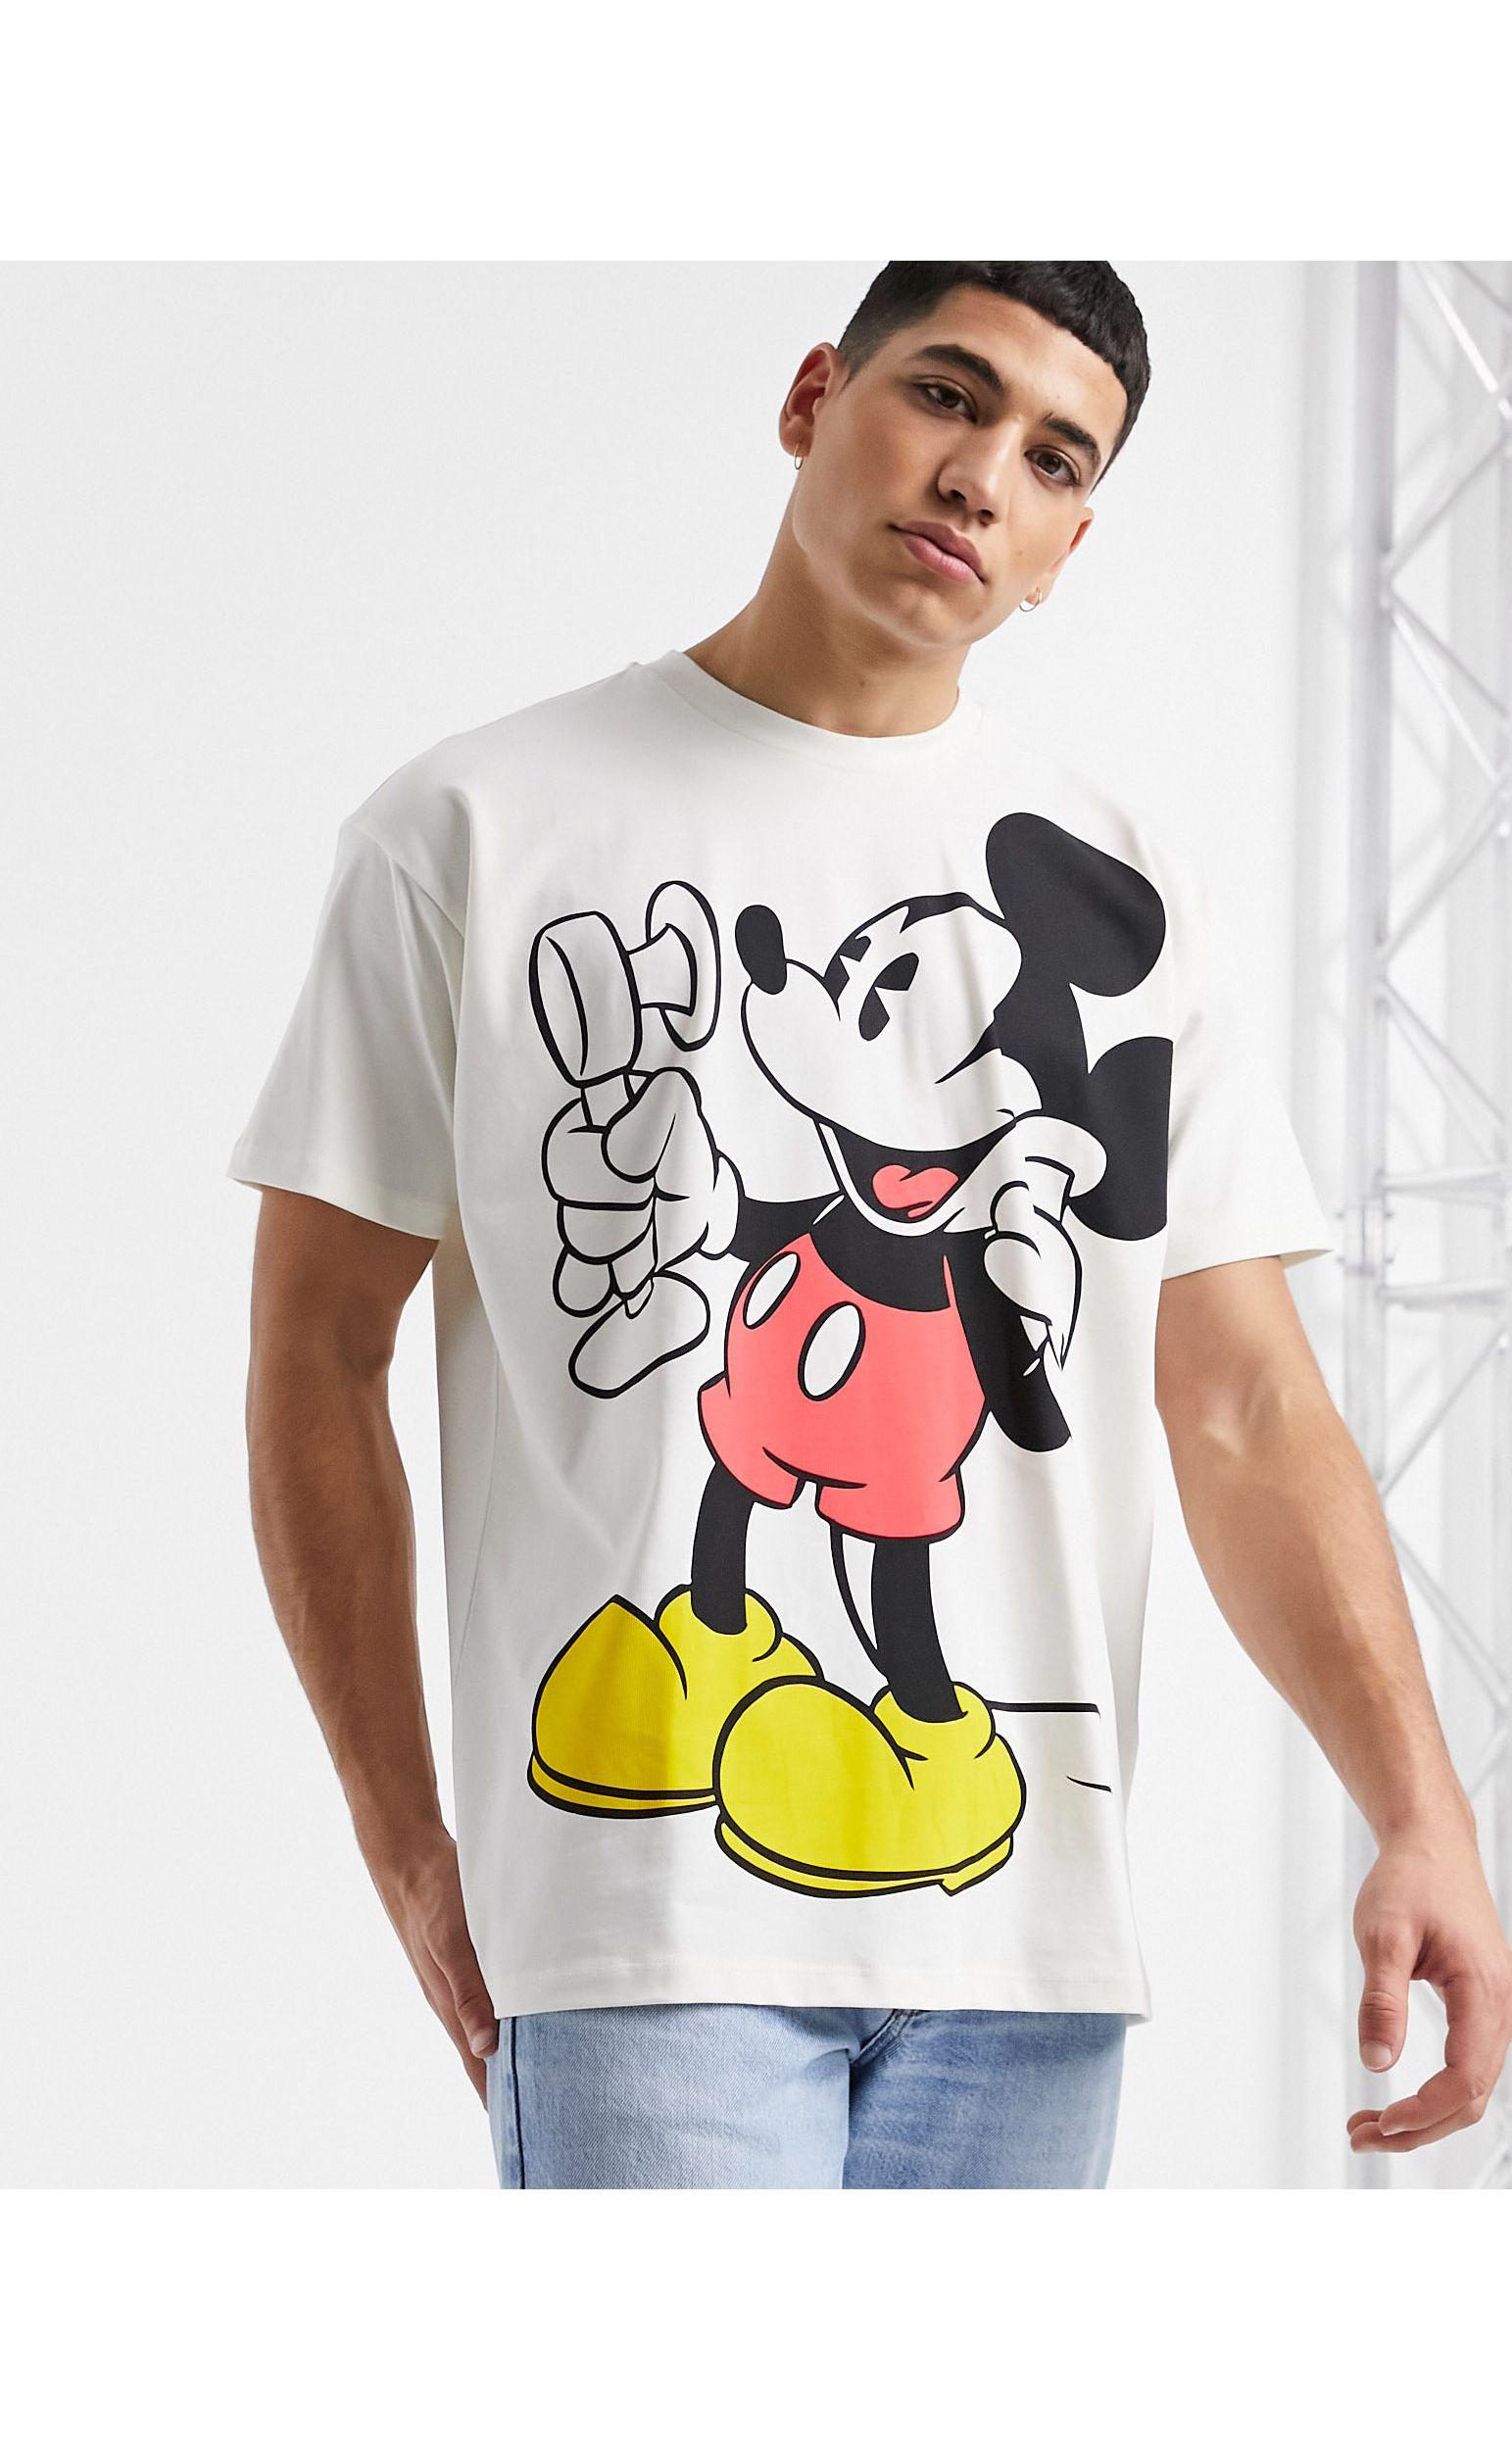 Levi's X Disney Large Mickey Mouse Graphic T-shirt in White for Men - Lyst